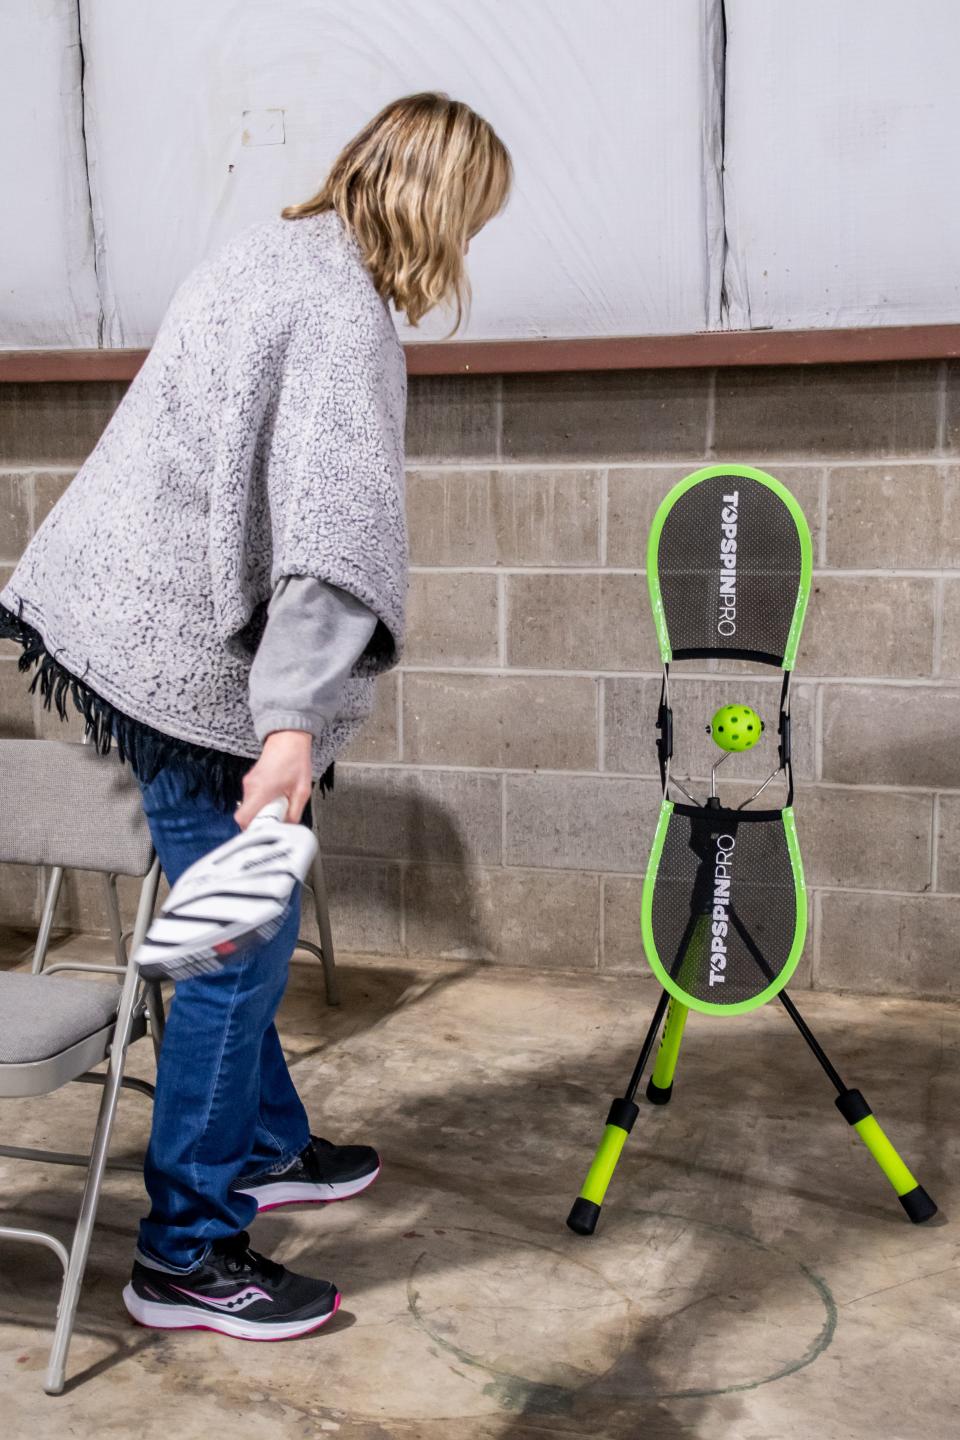 Cathie Akins of Coshocton tries out the TopSpin Pro machine at the newly opened Hilltop Pickleball Facility in Cambridge.